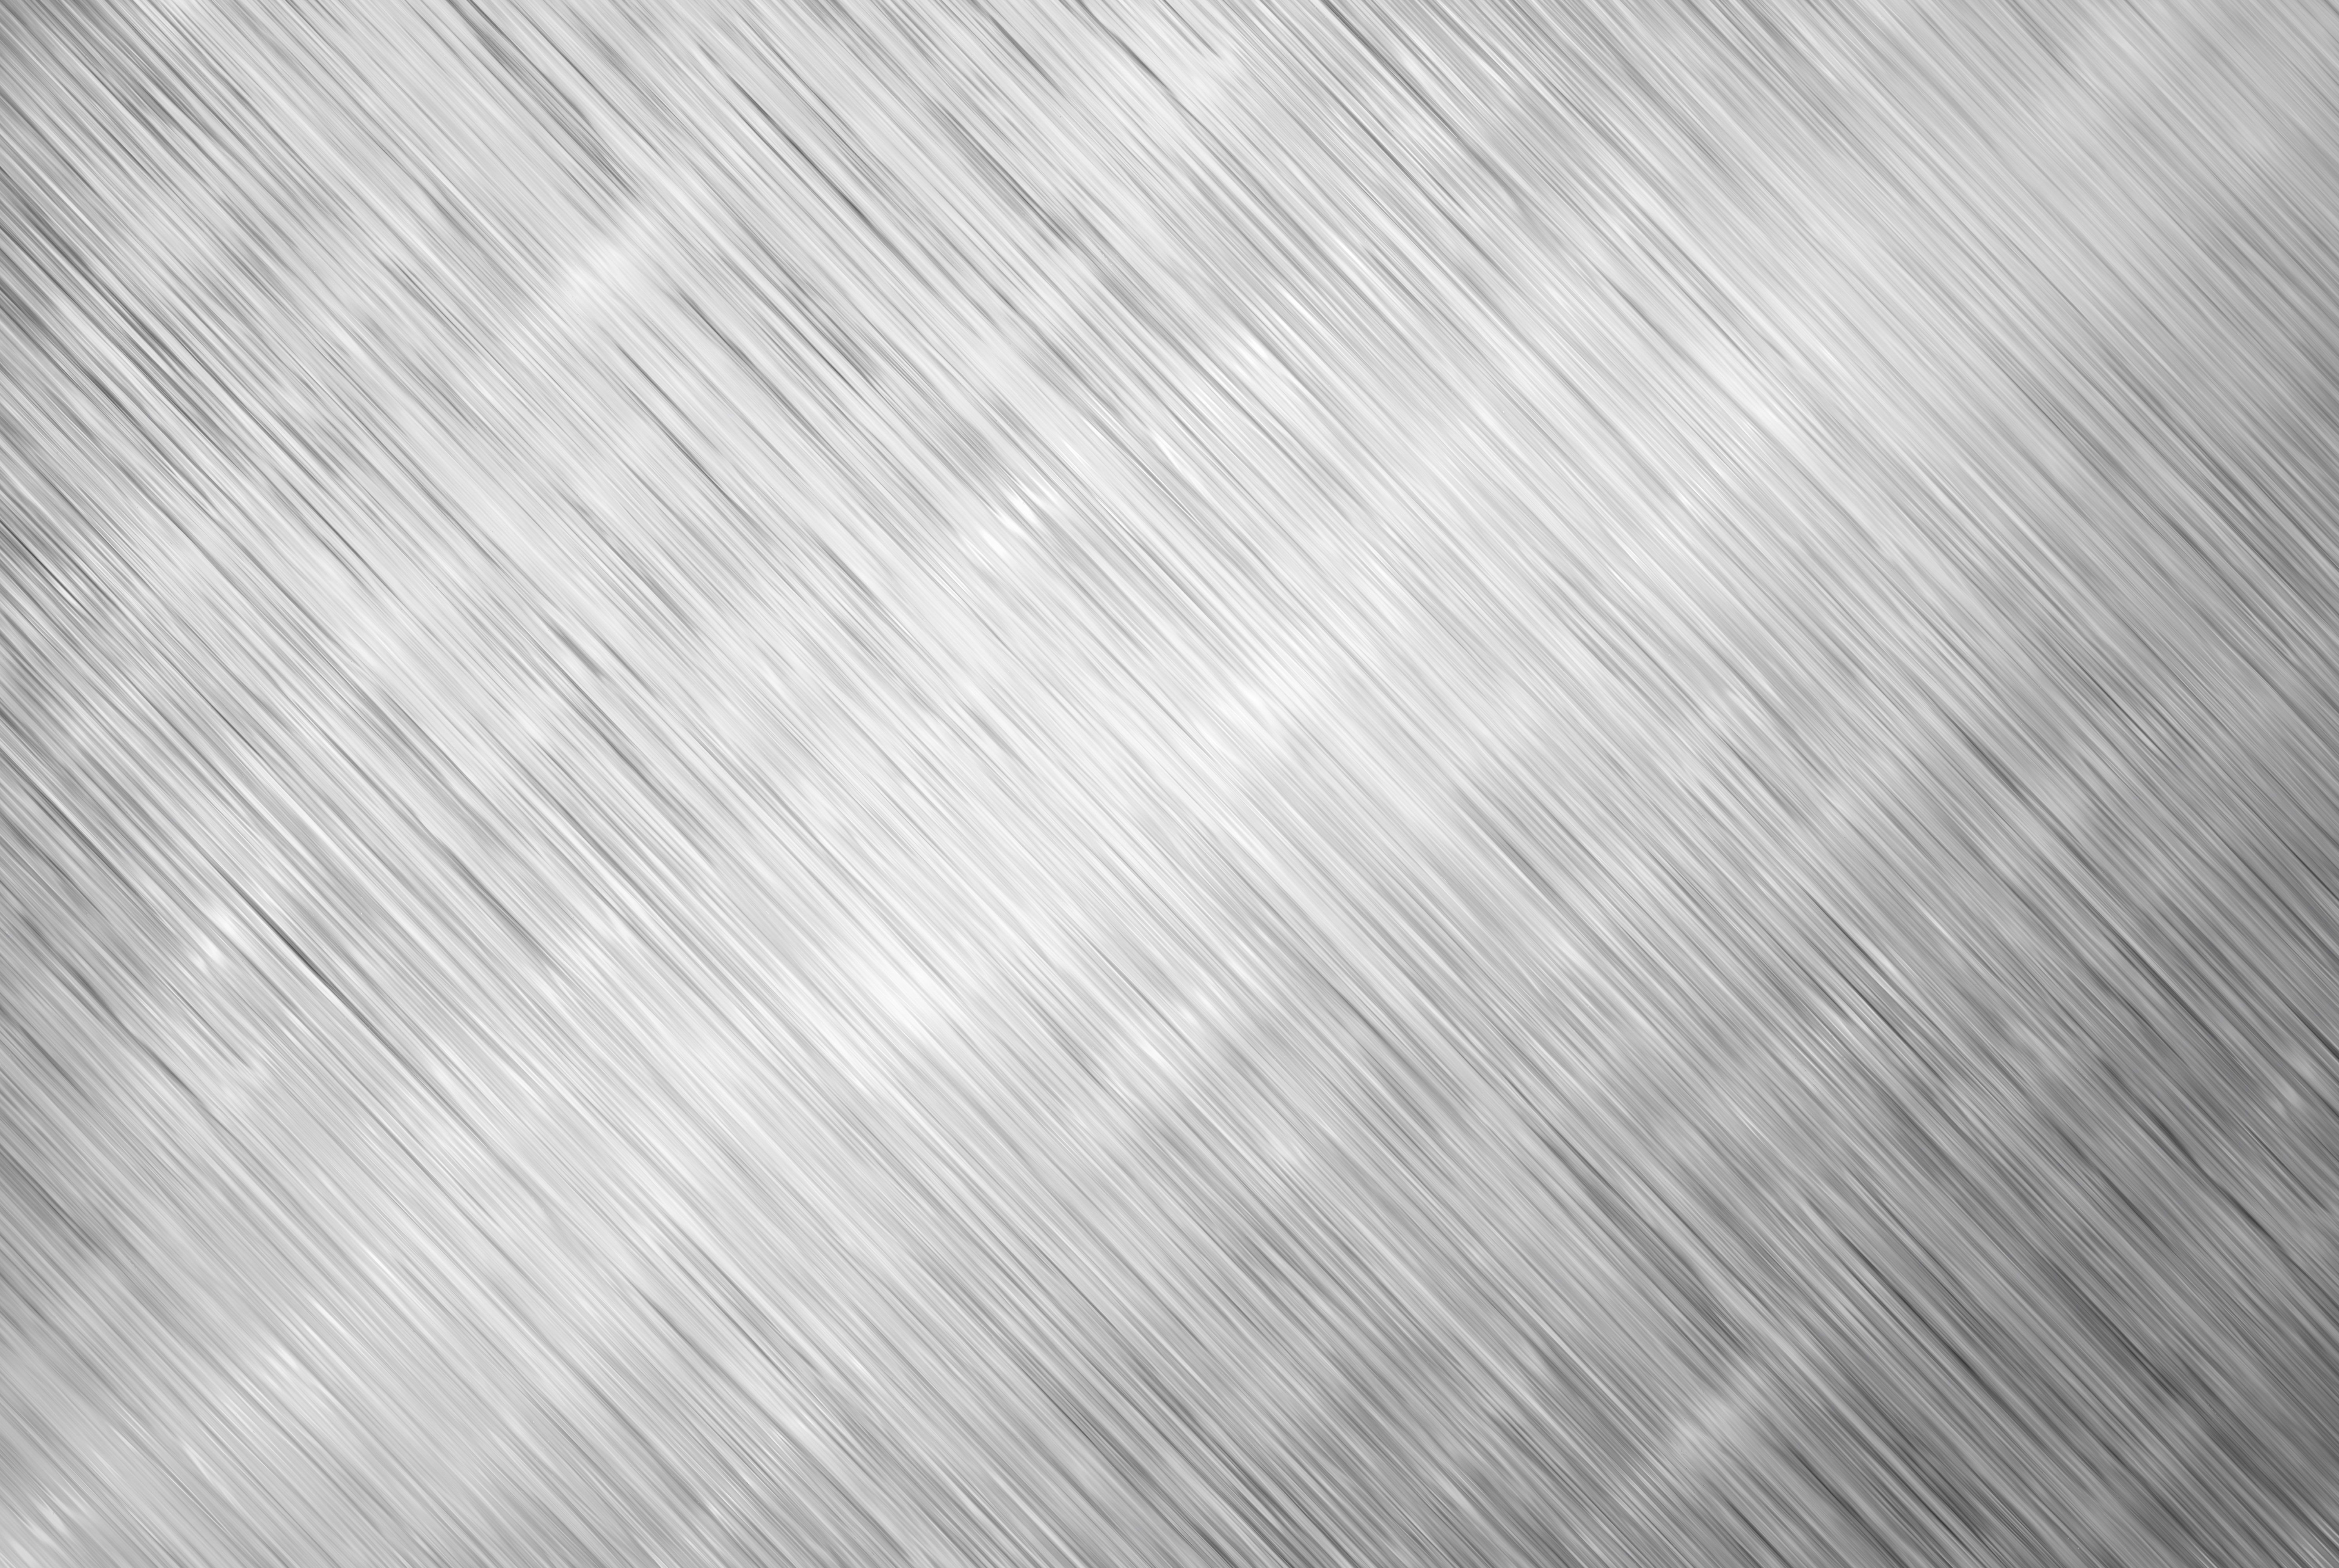 Brushed Metal Texture – 35+ Great Free Images From Aluminum and ...